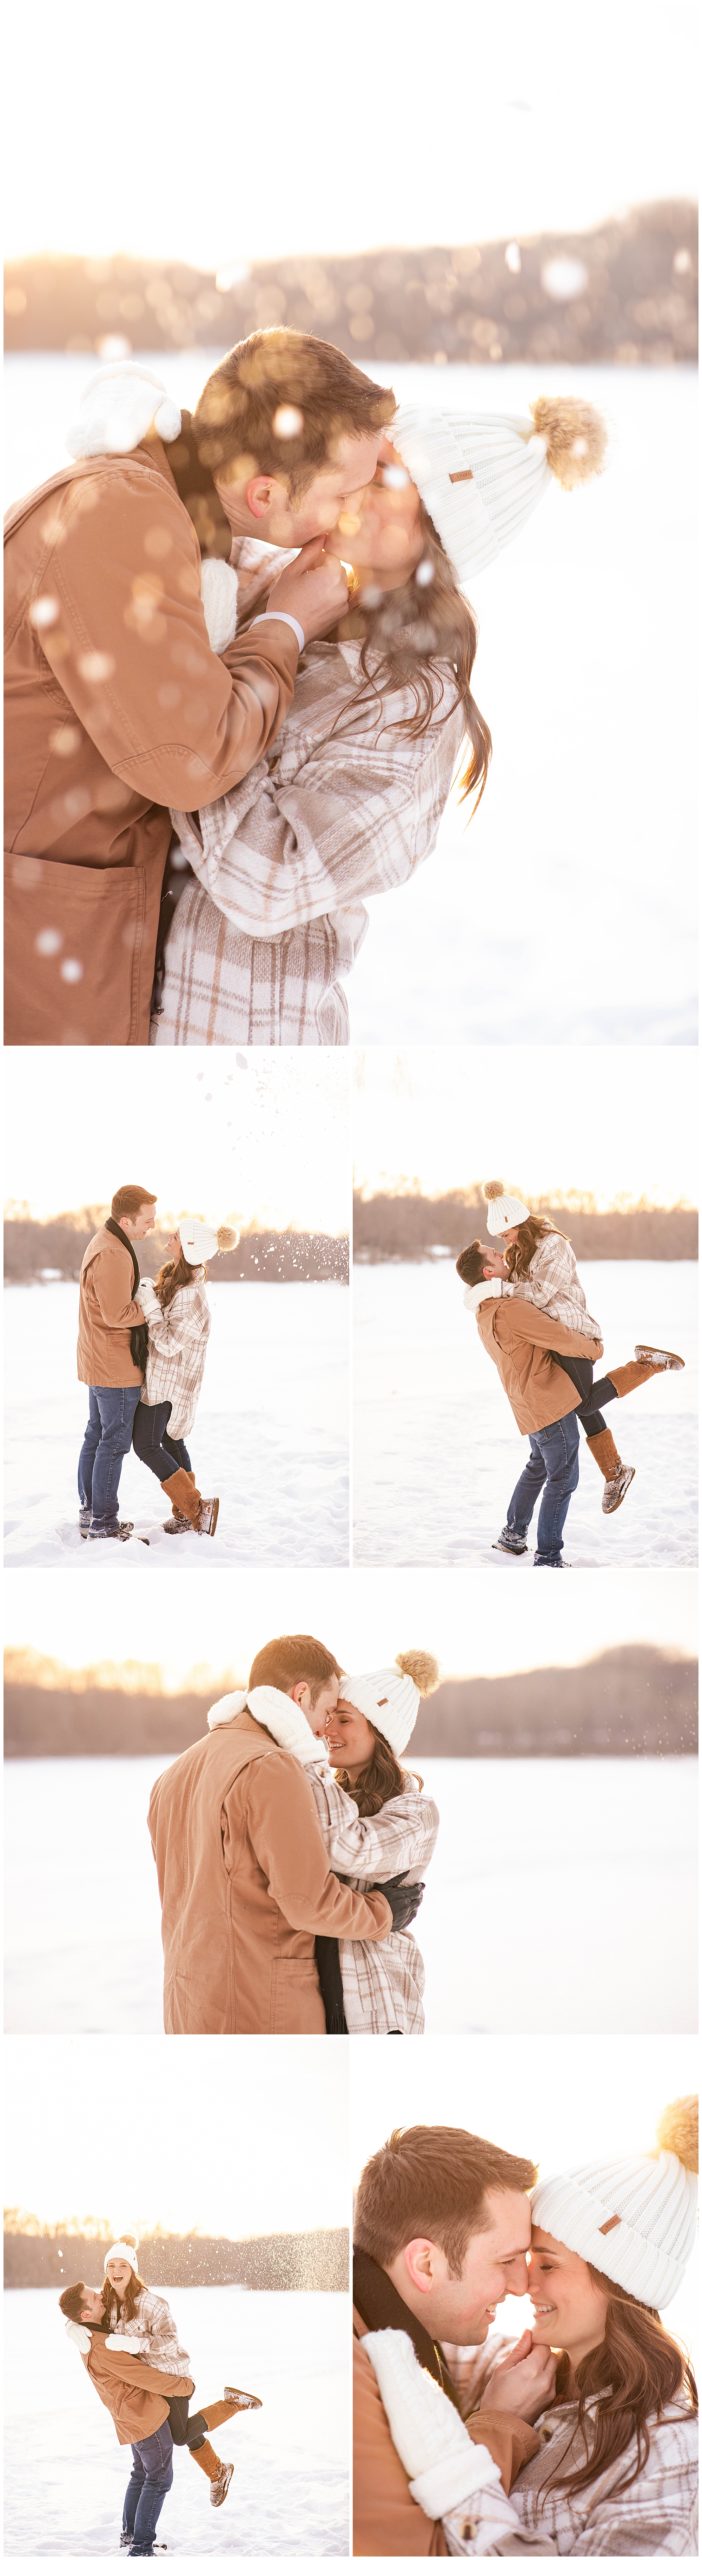 Playful winter photos with couple in snow 